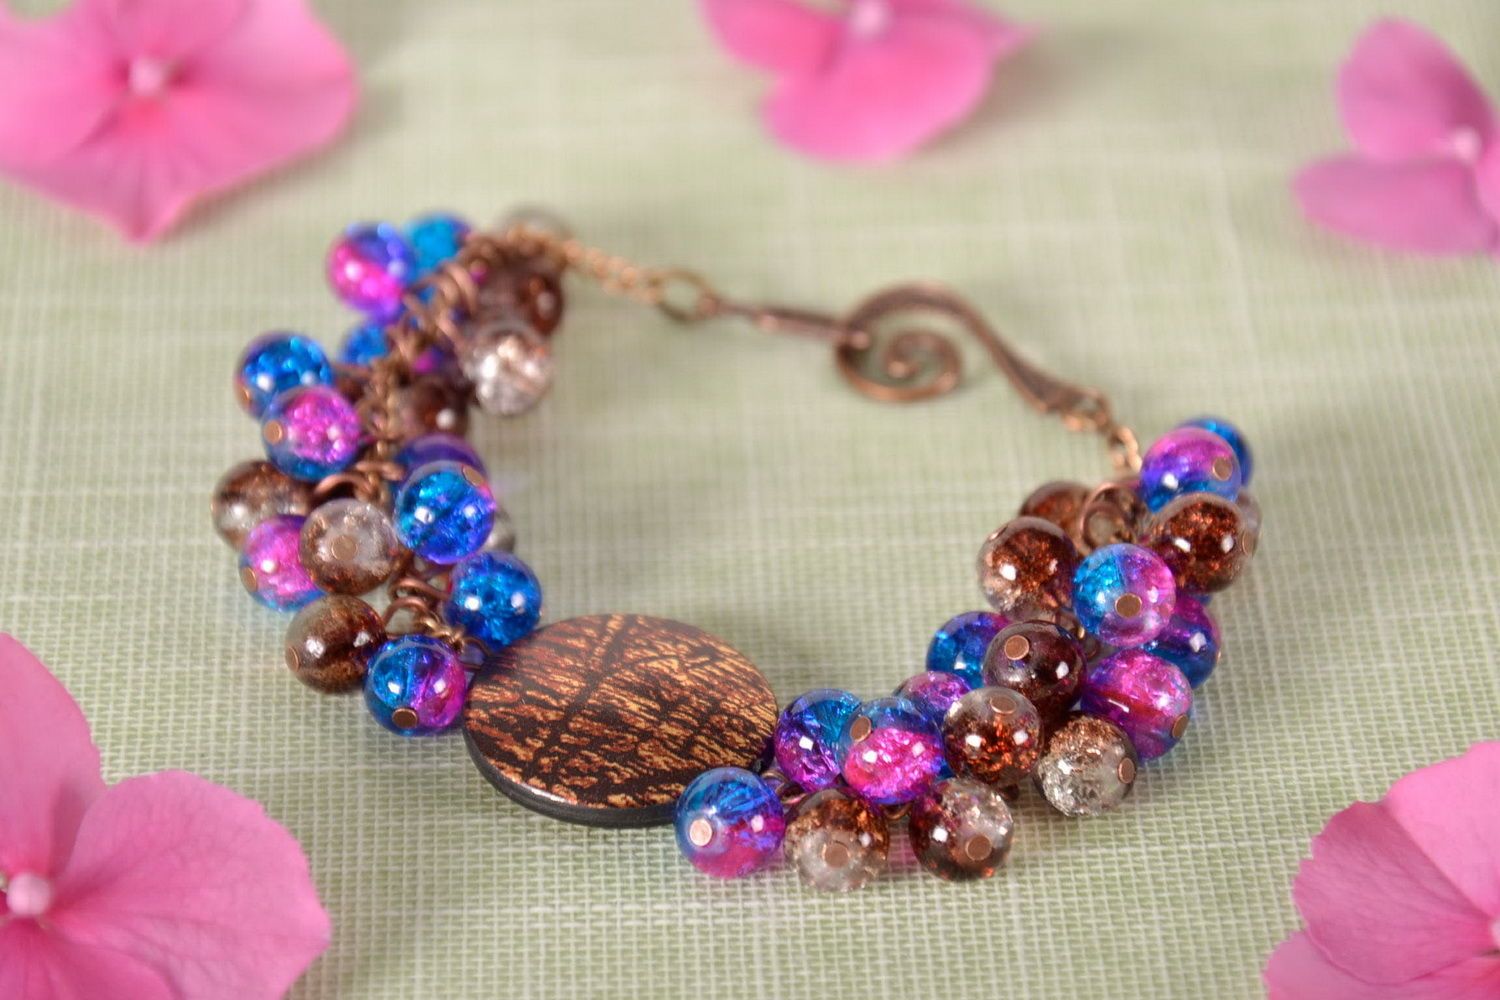 Handmade bracelet made from multi-colored beads photo 1